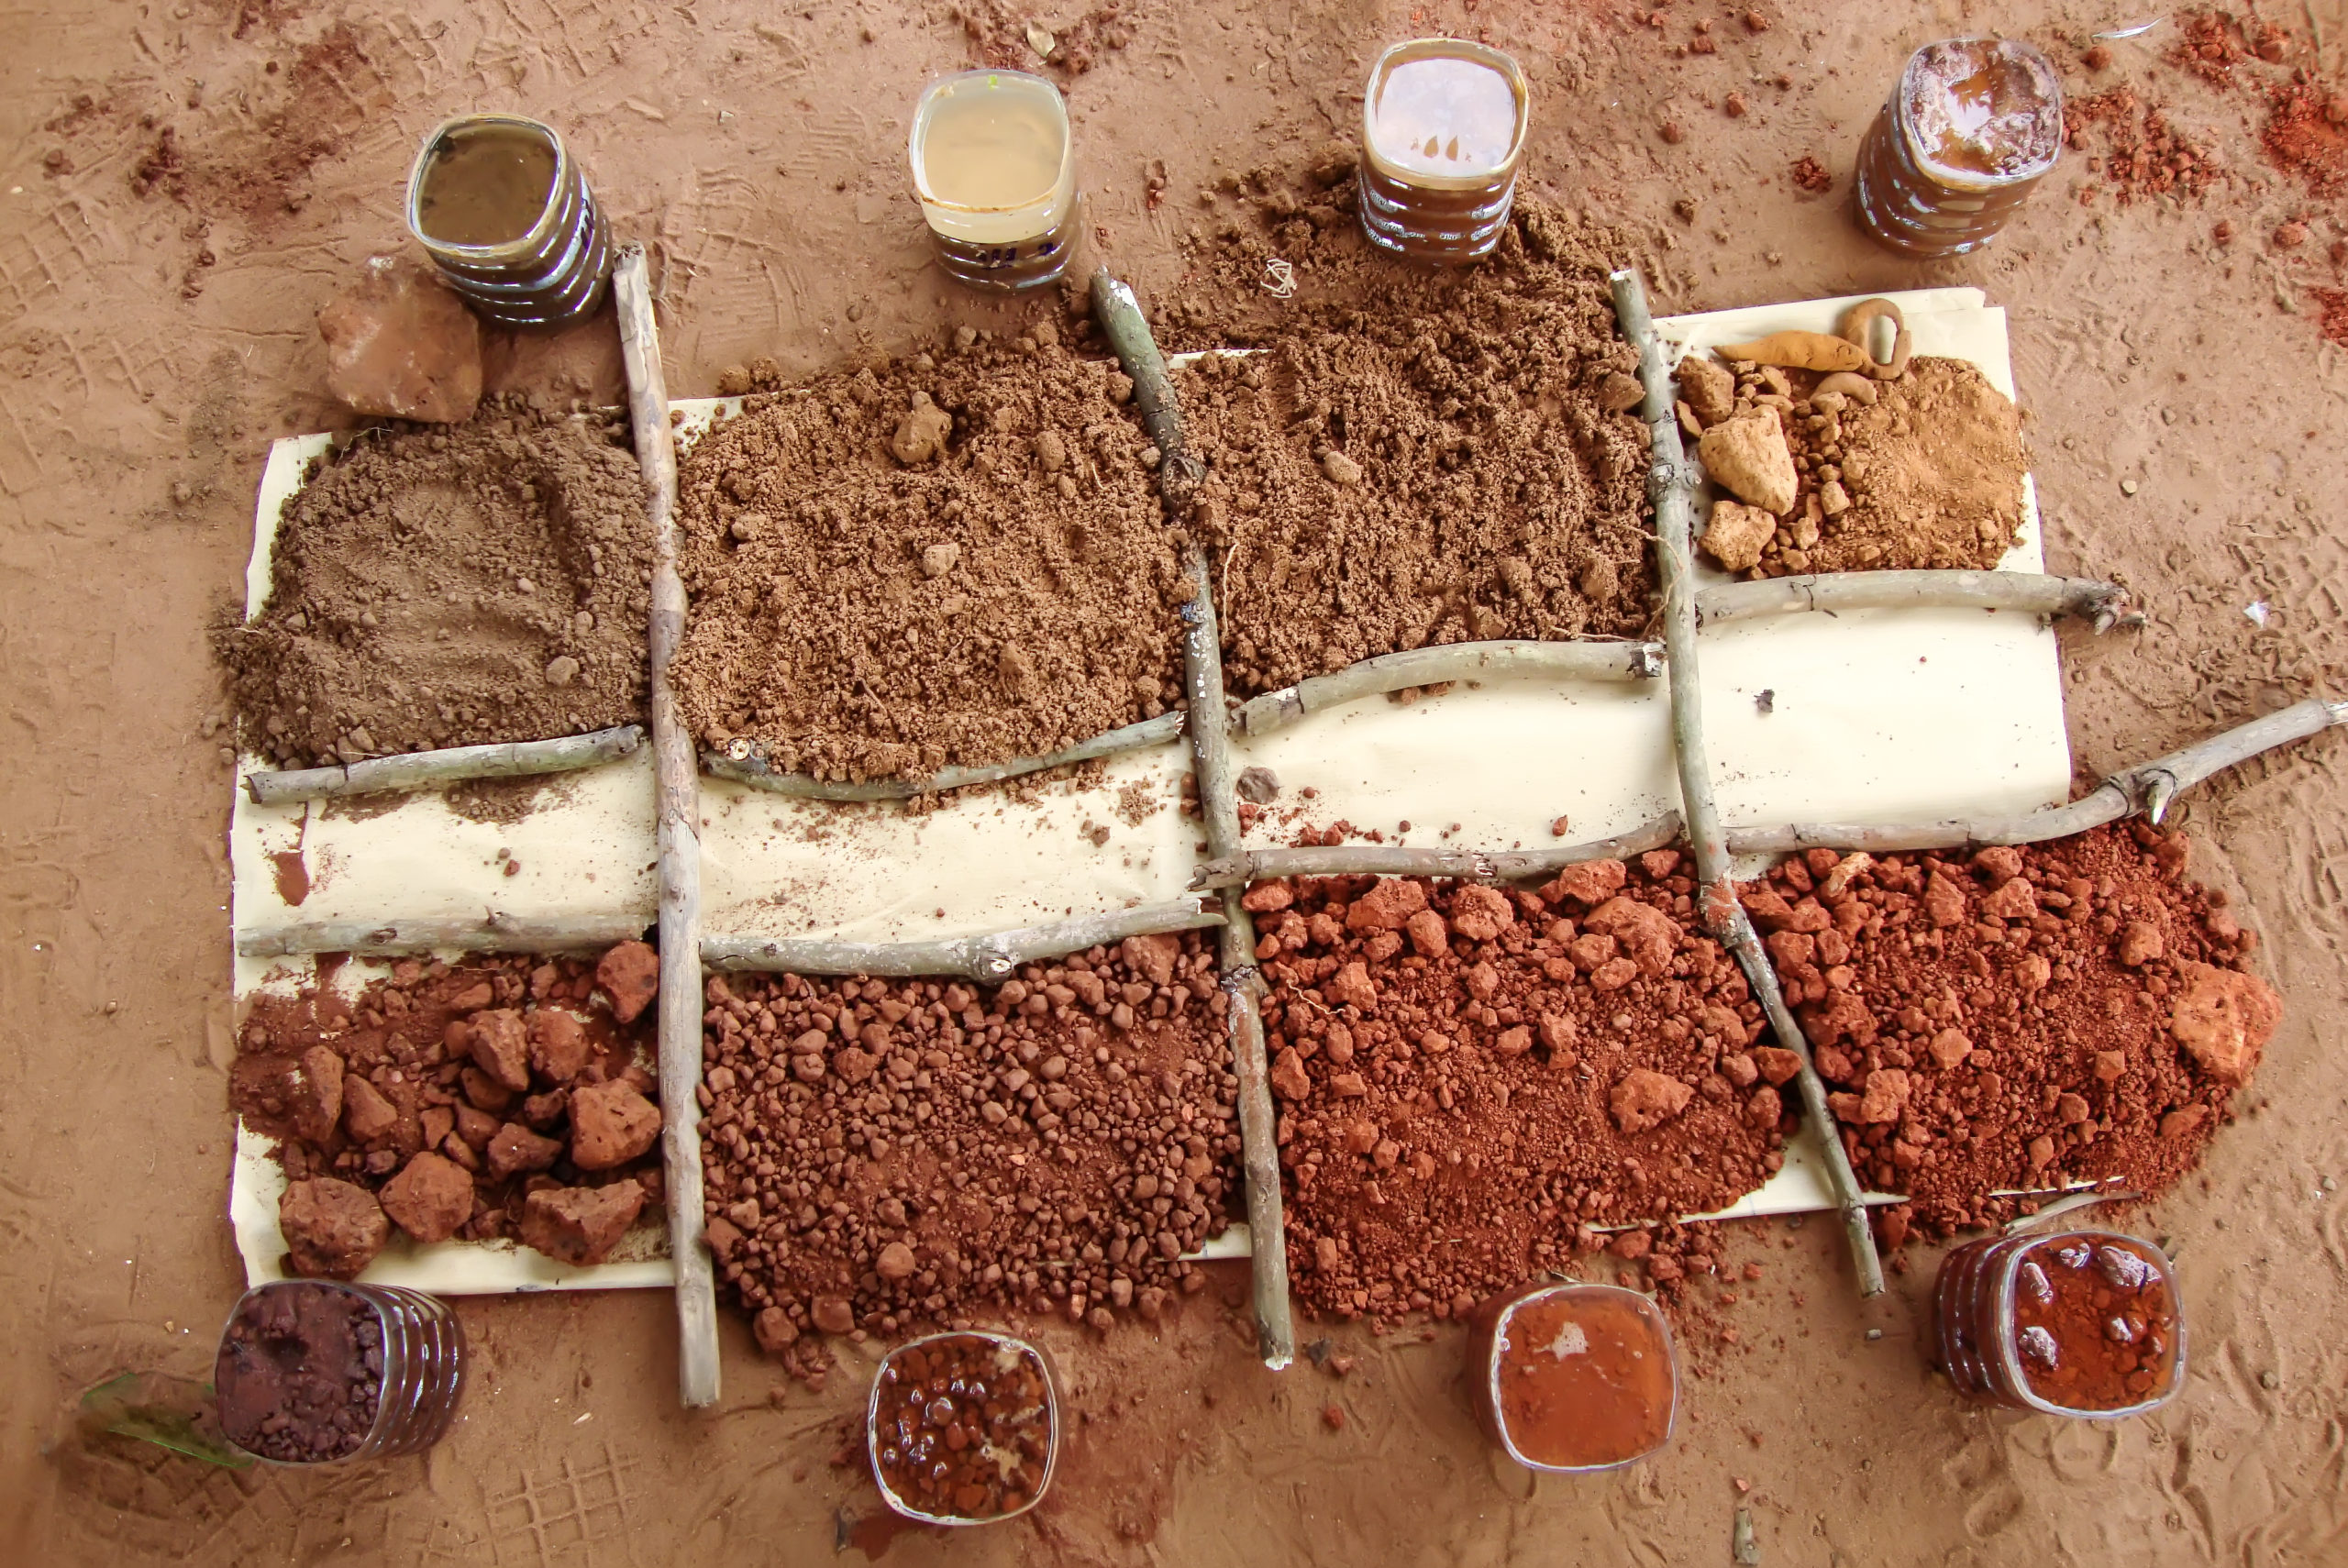 Different types of soil are displayed.